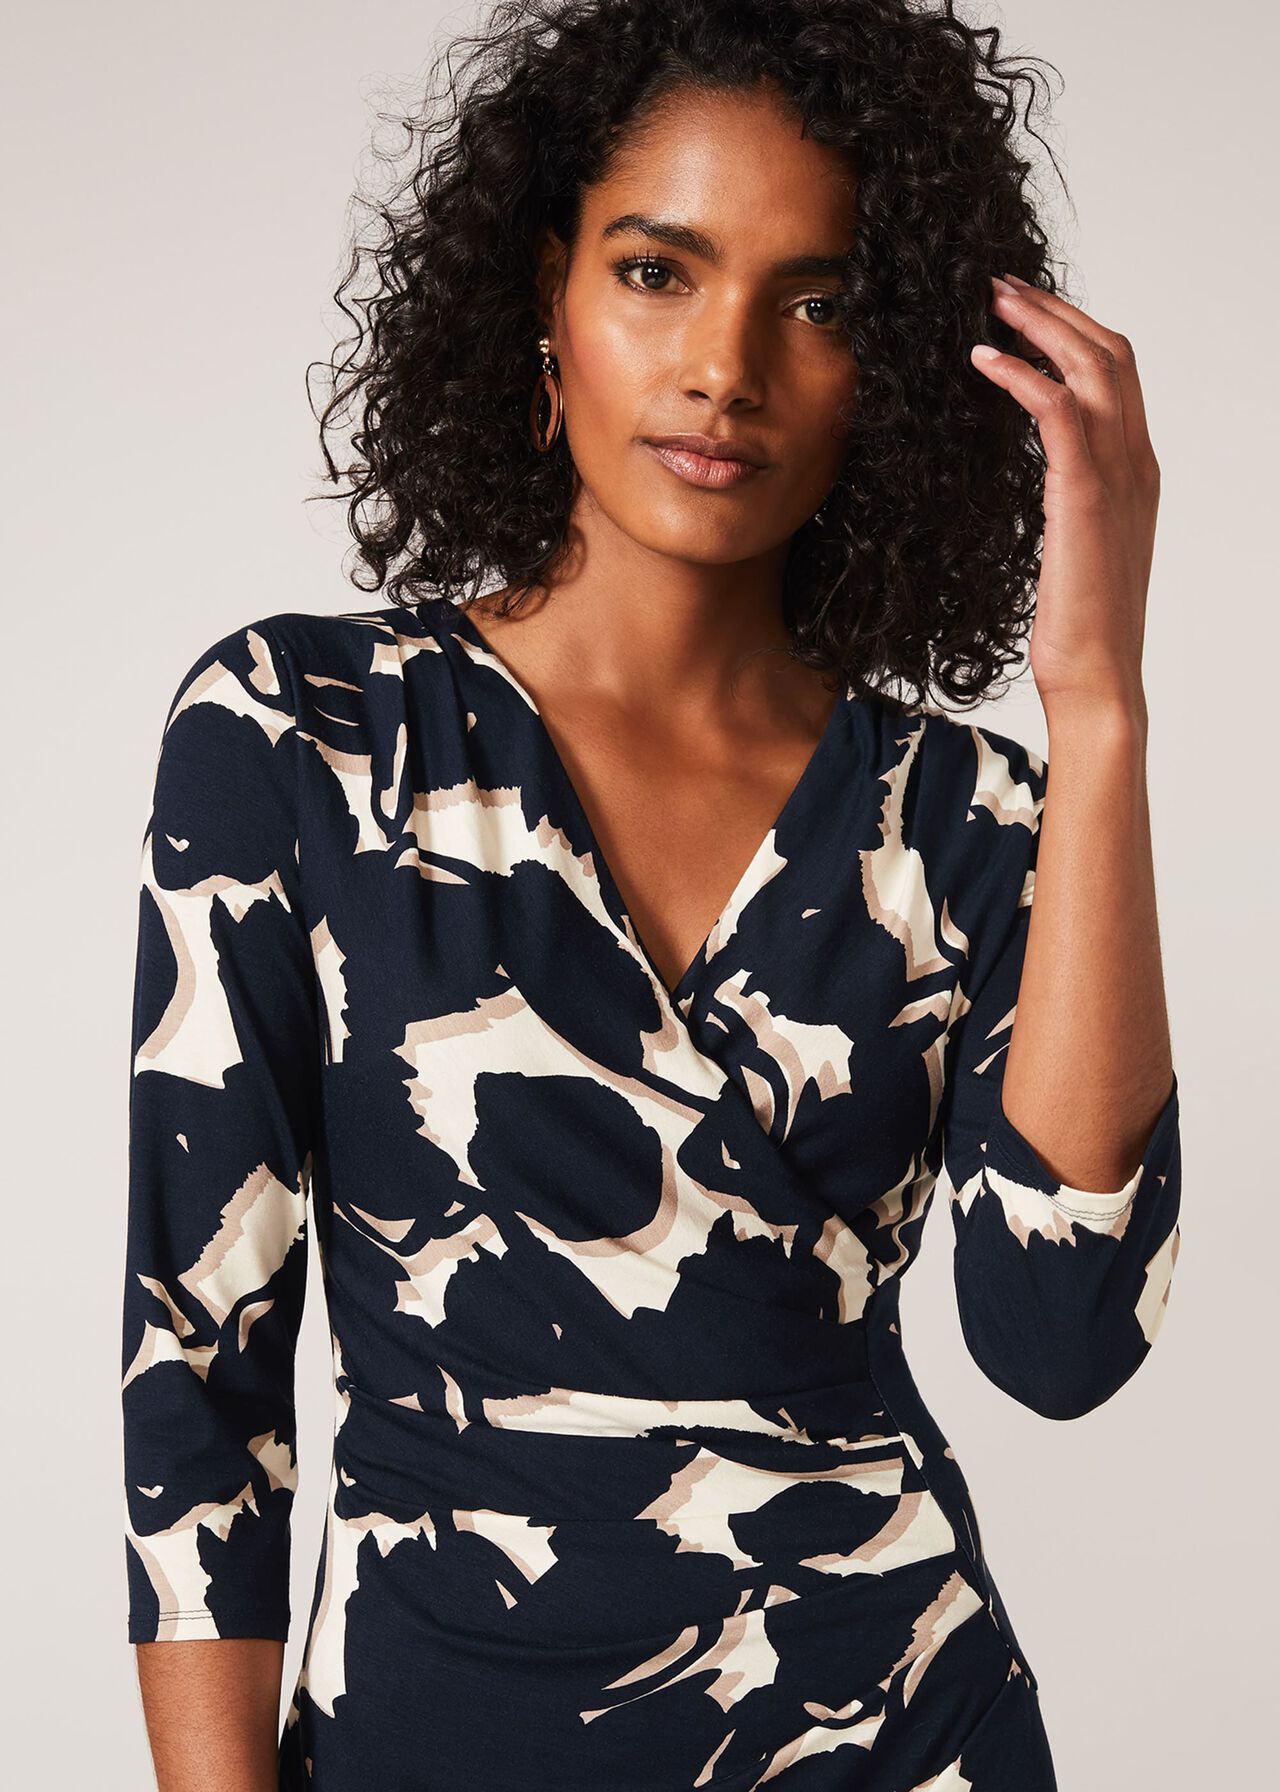 Naava Abstract Floral Dress